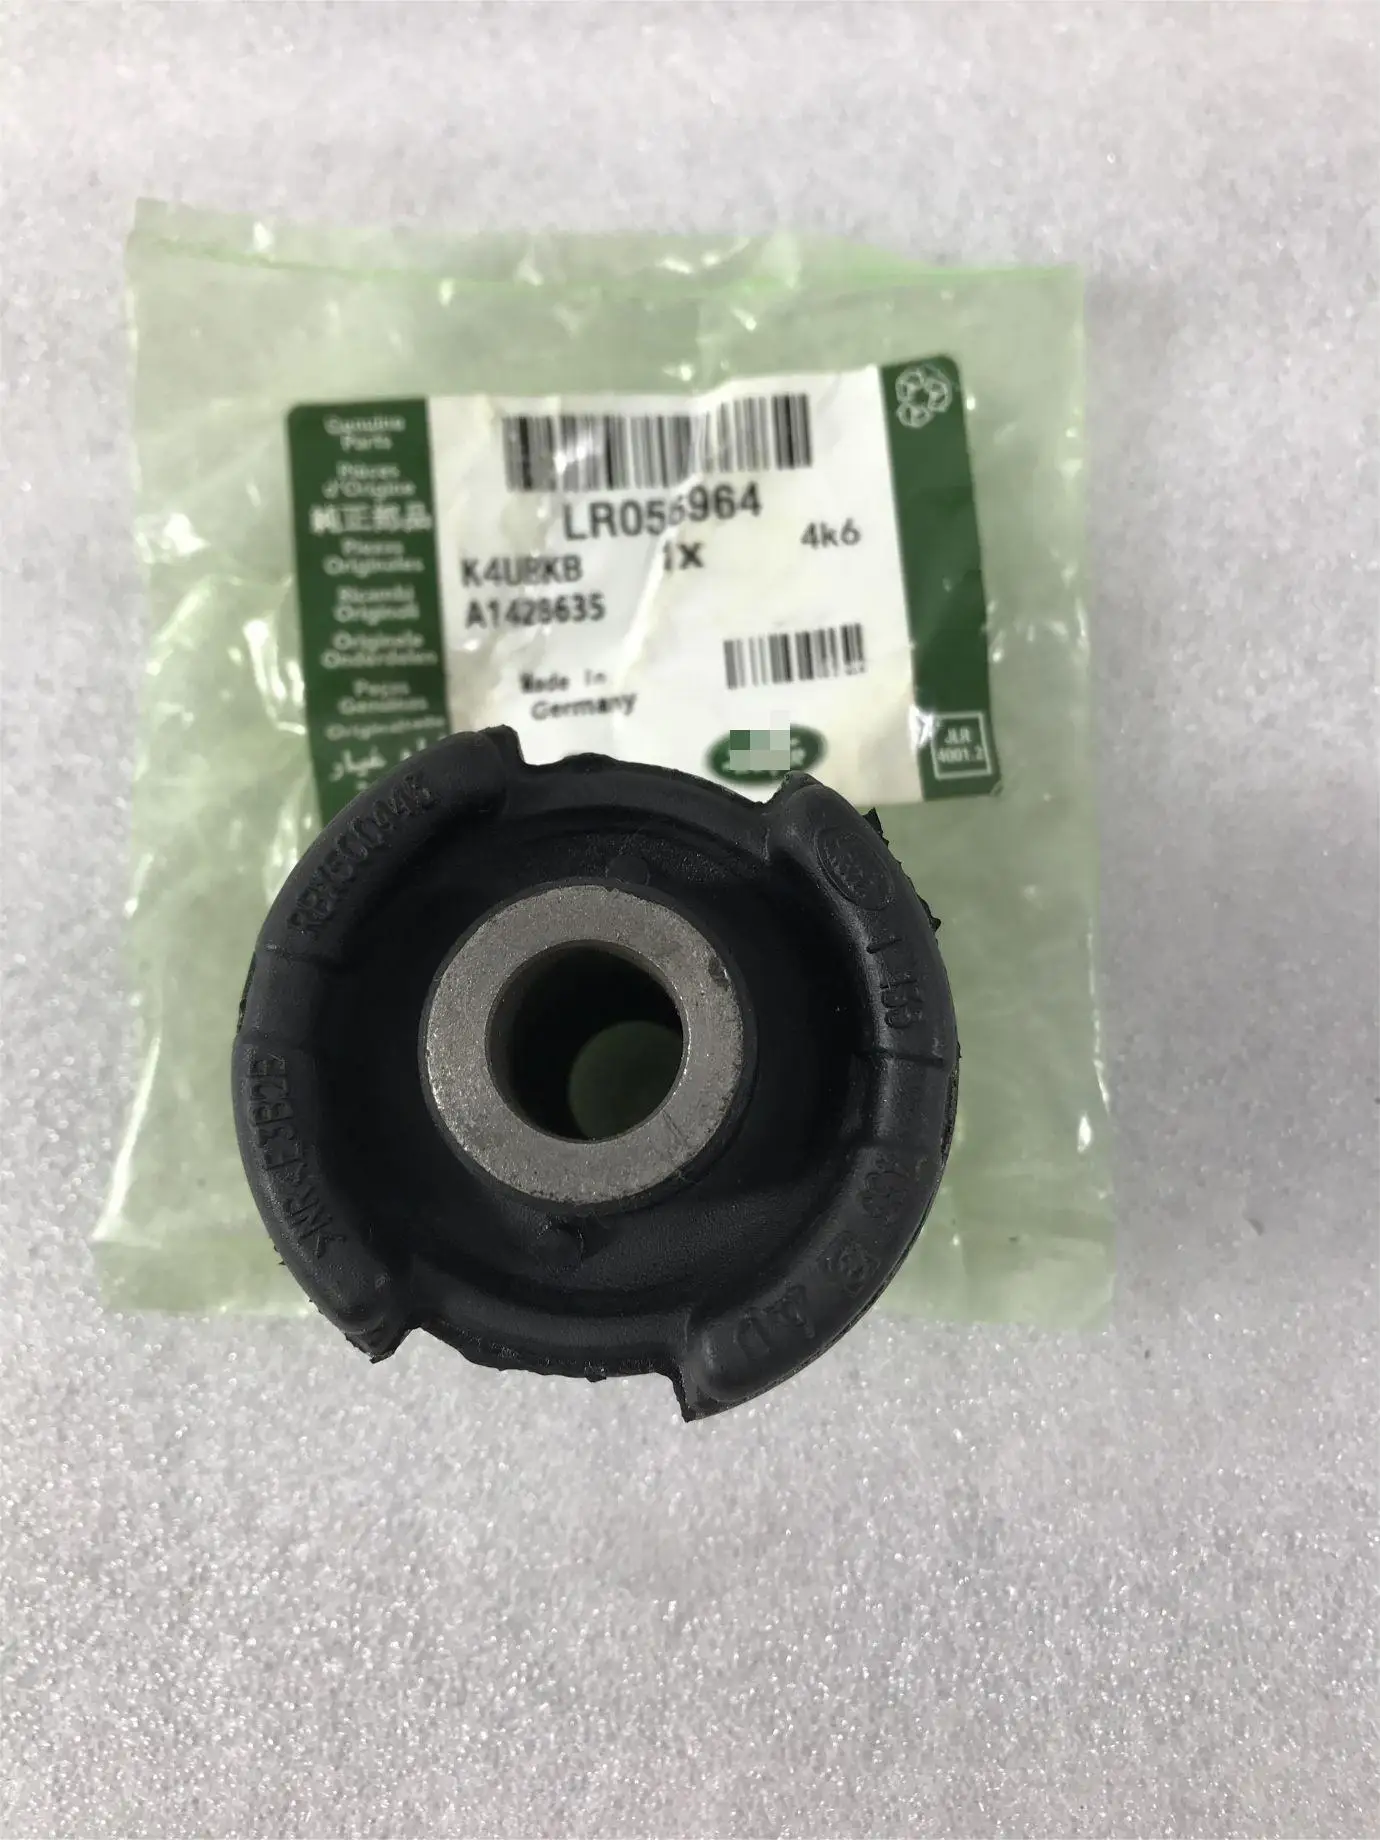 

Land Rover Discovery LR3 LR4 rbx500301 rbx500443 lr056964 new front suspension upper control arm bushing